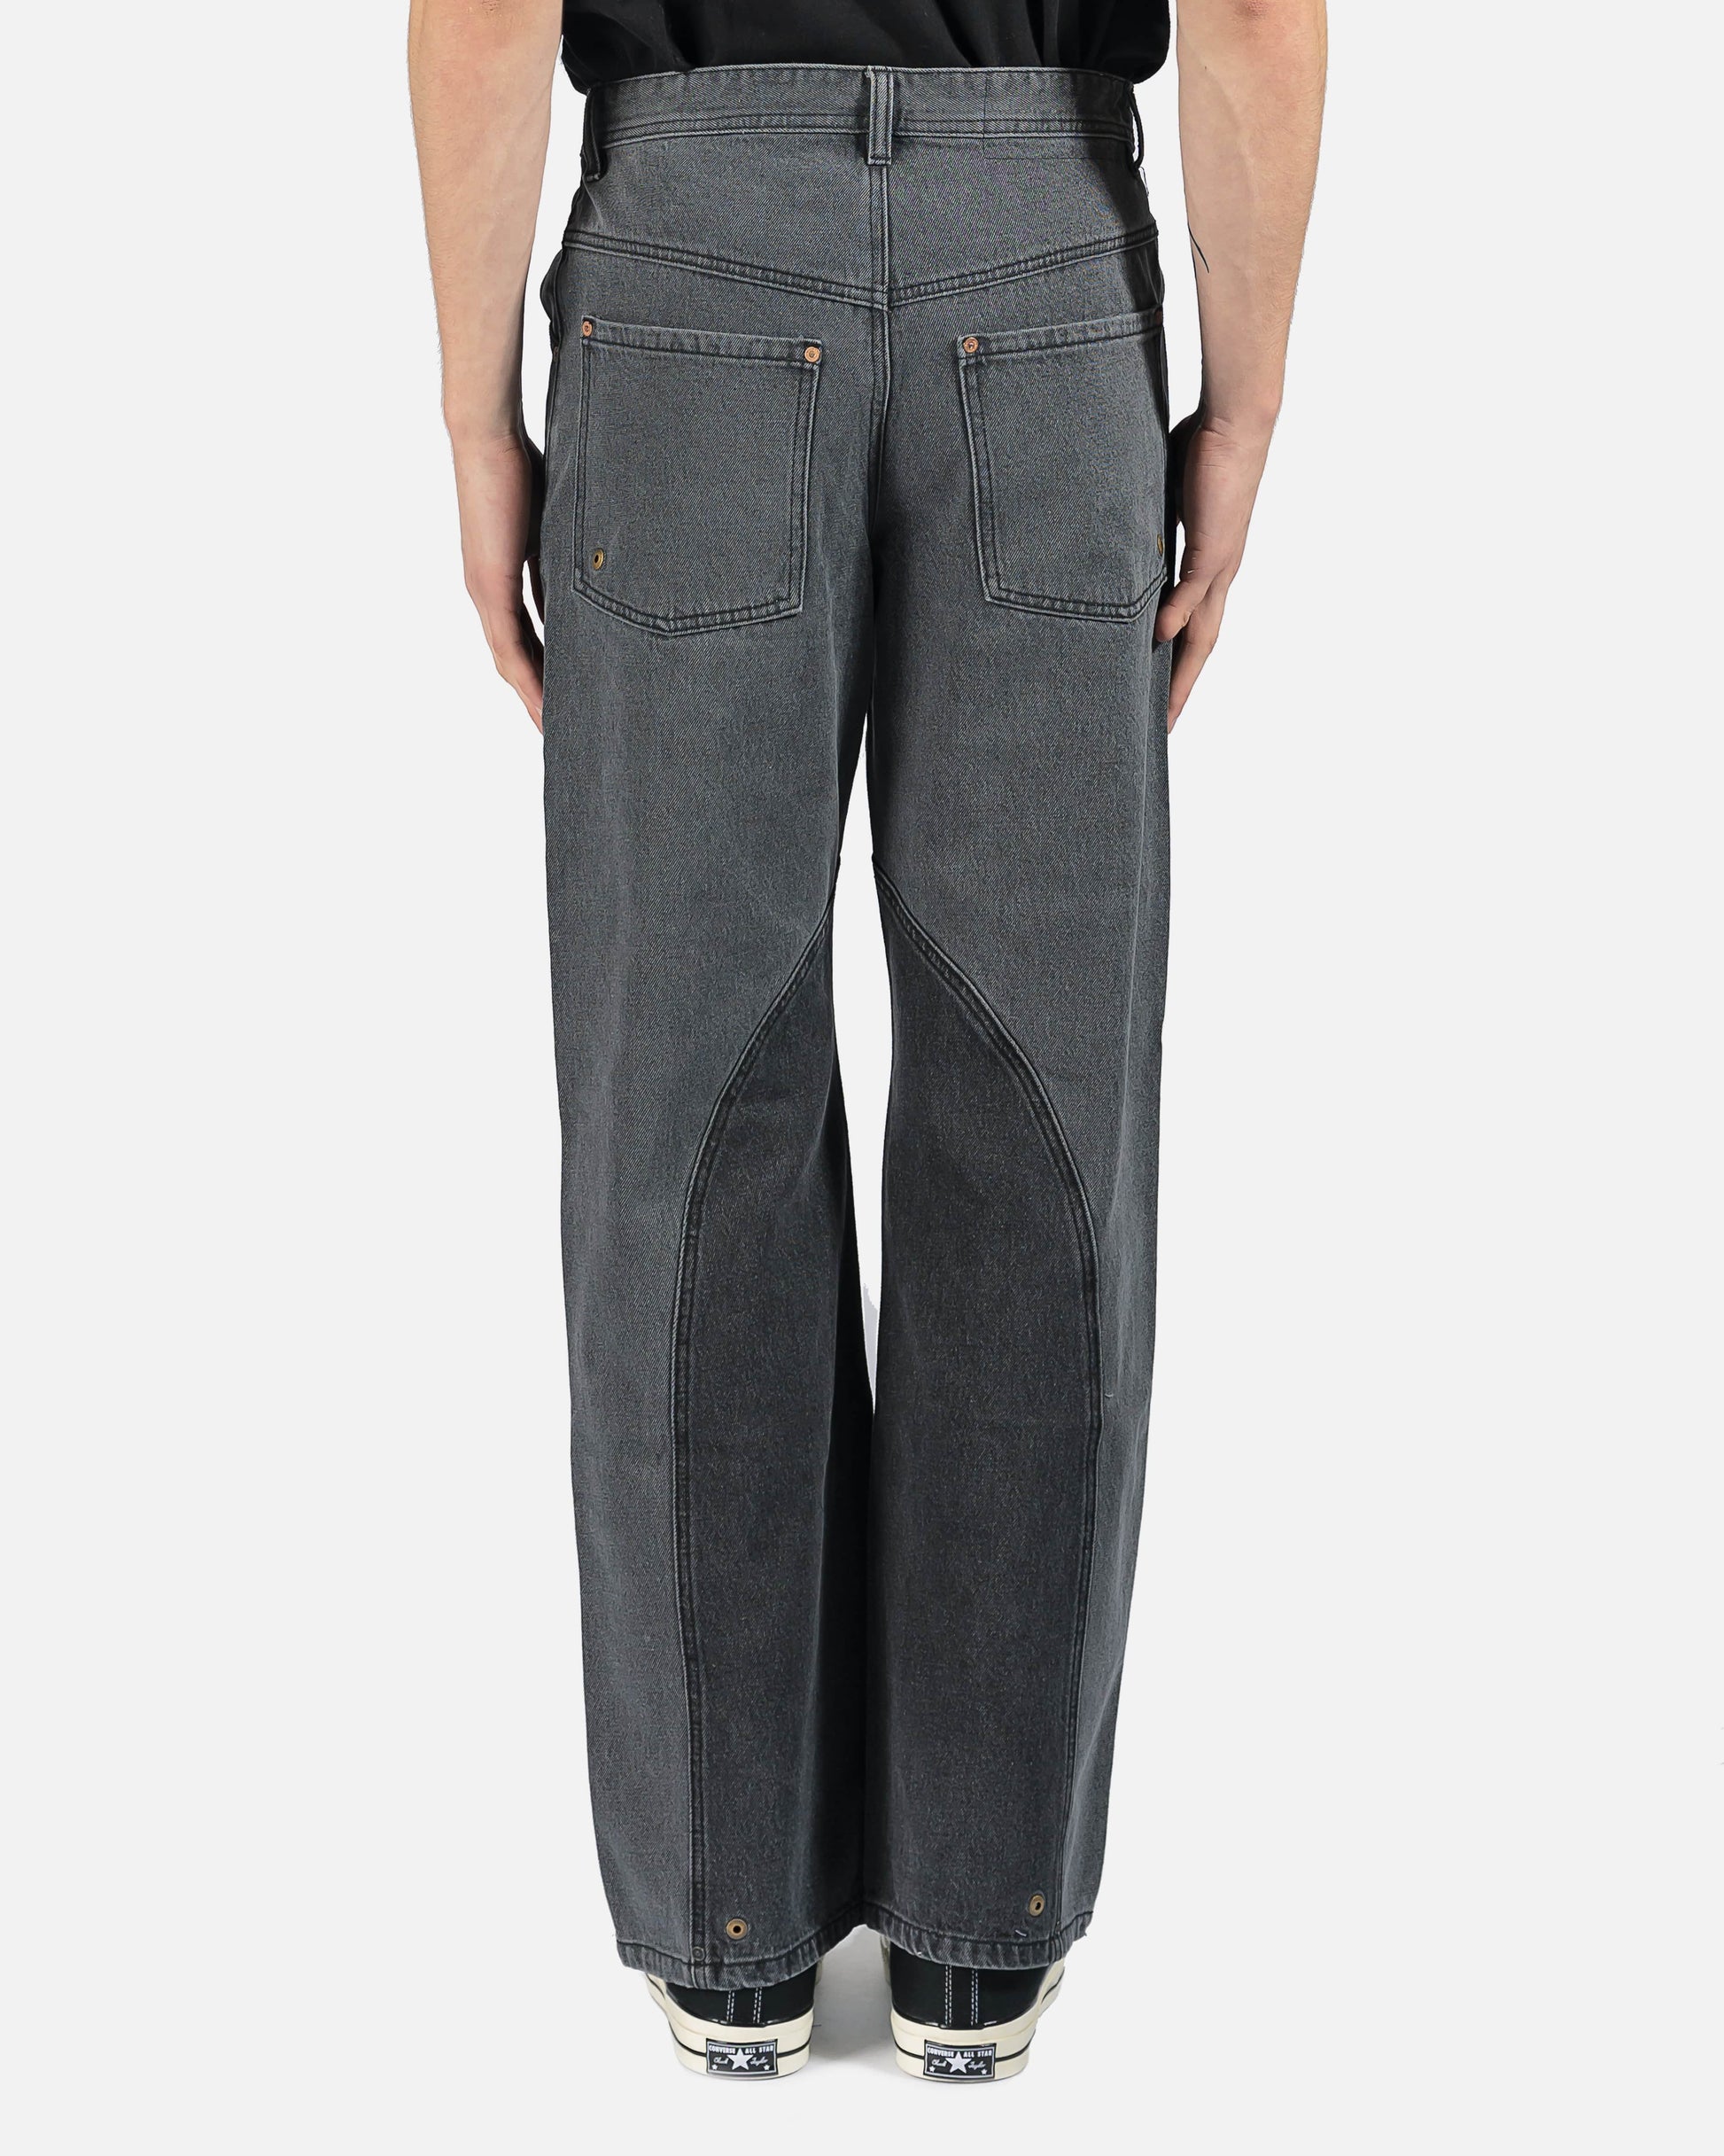 Andersson Bell Lucas Contrast Panel Wide Leg Jeans in Washed Black